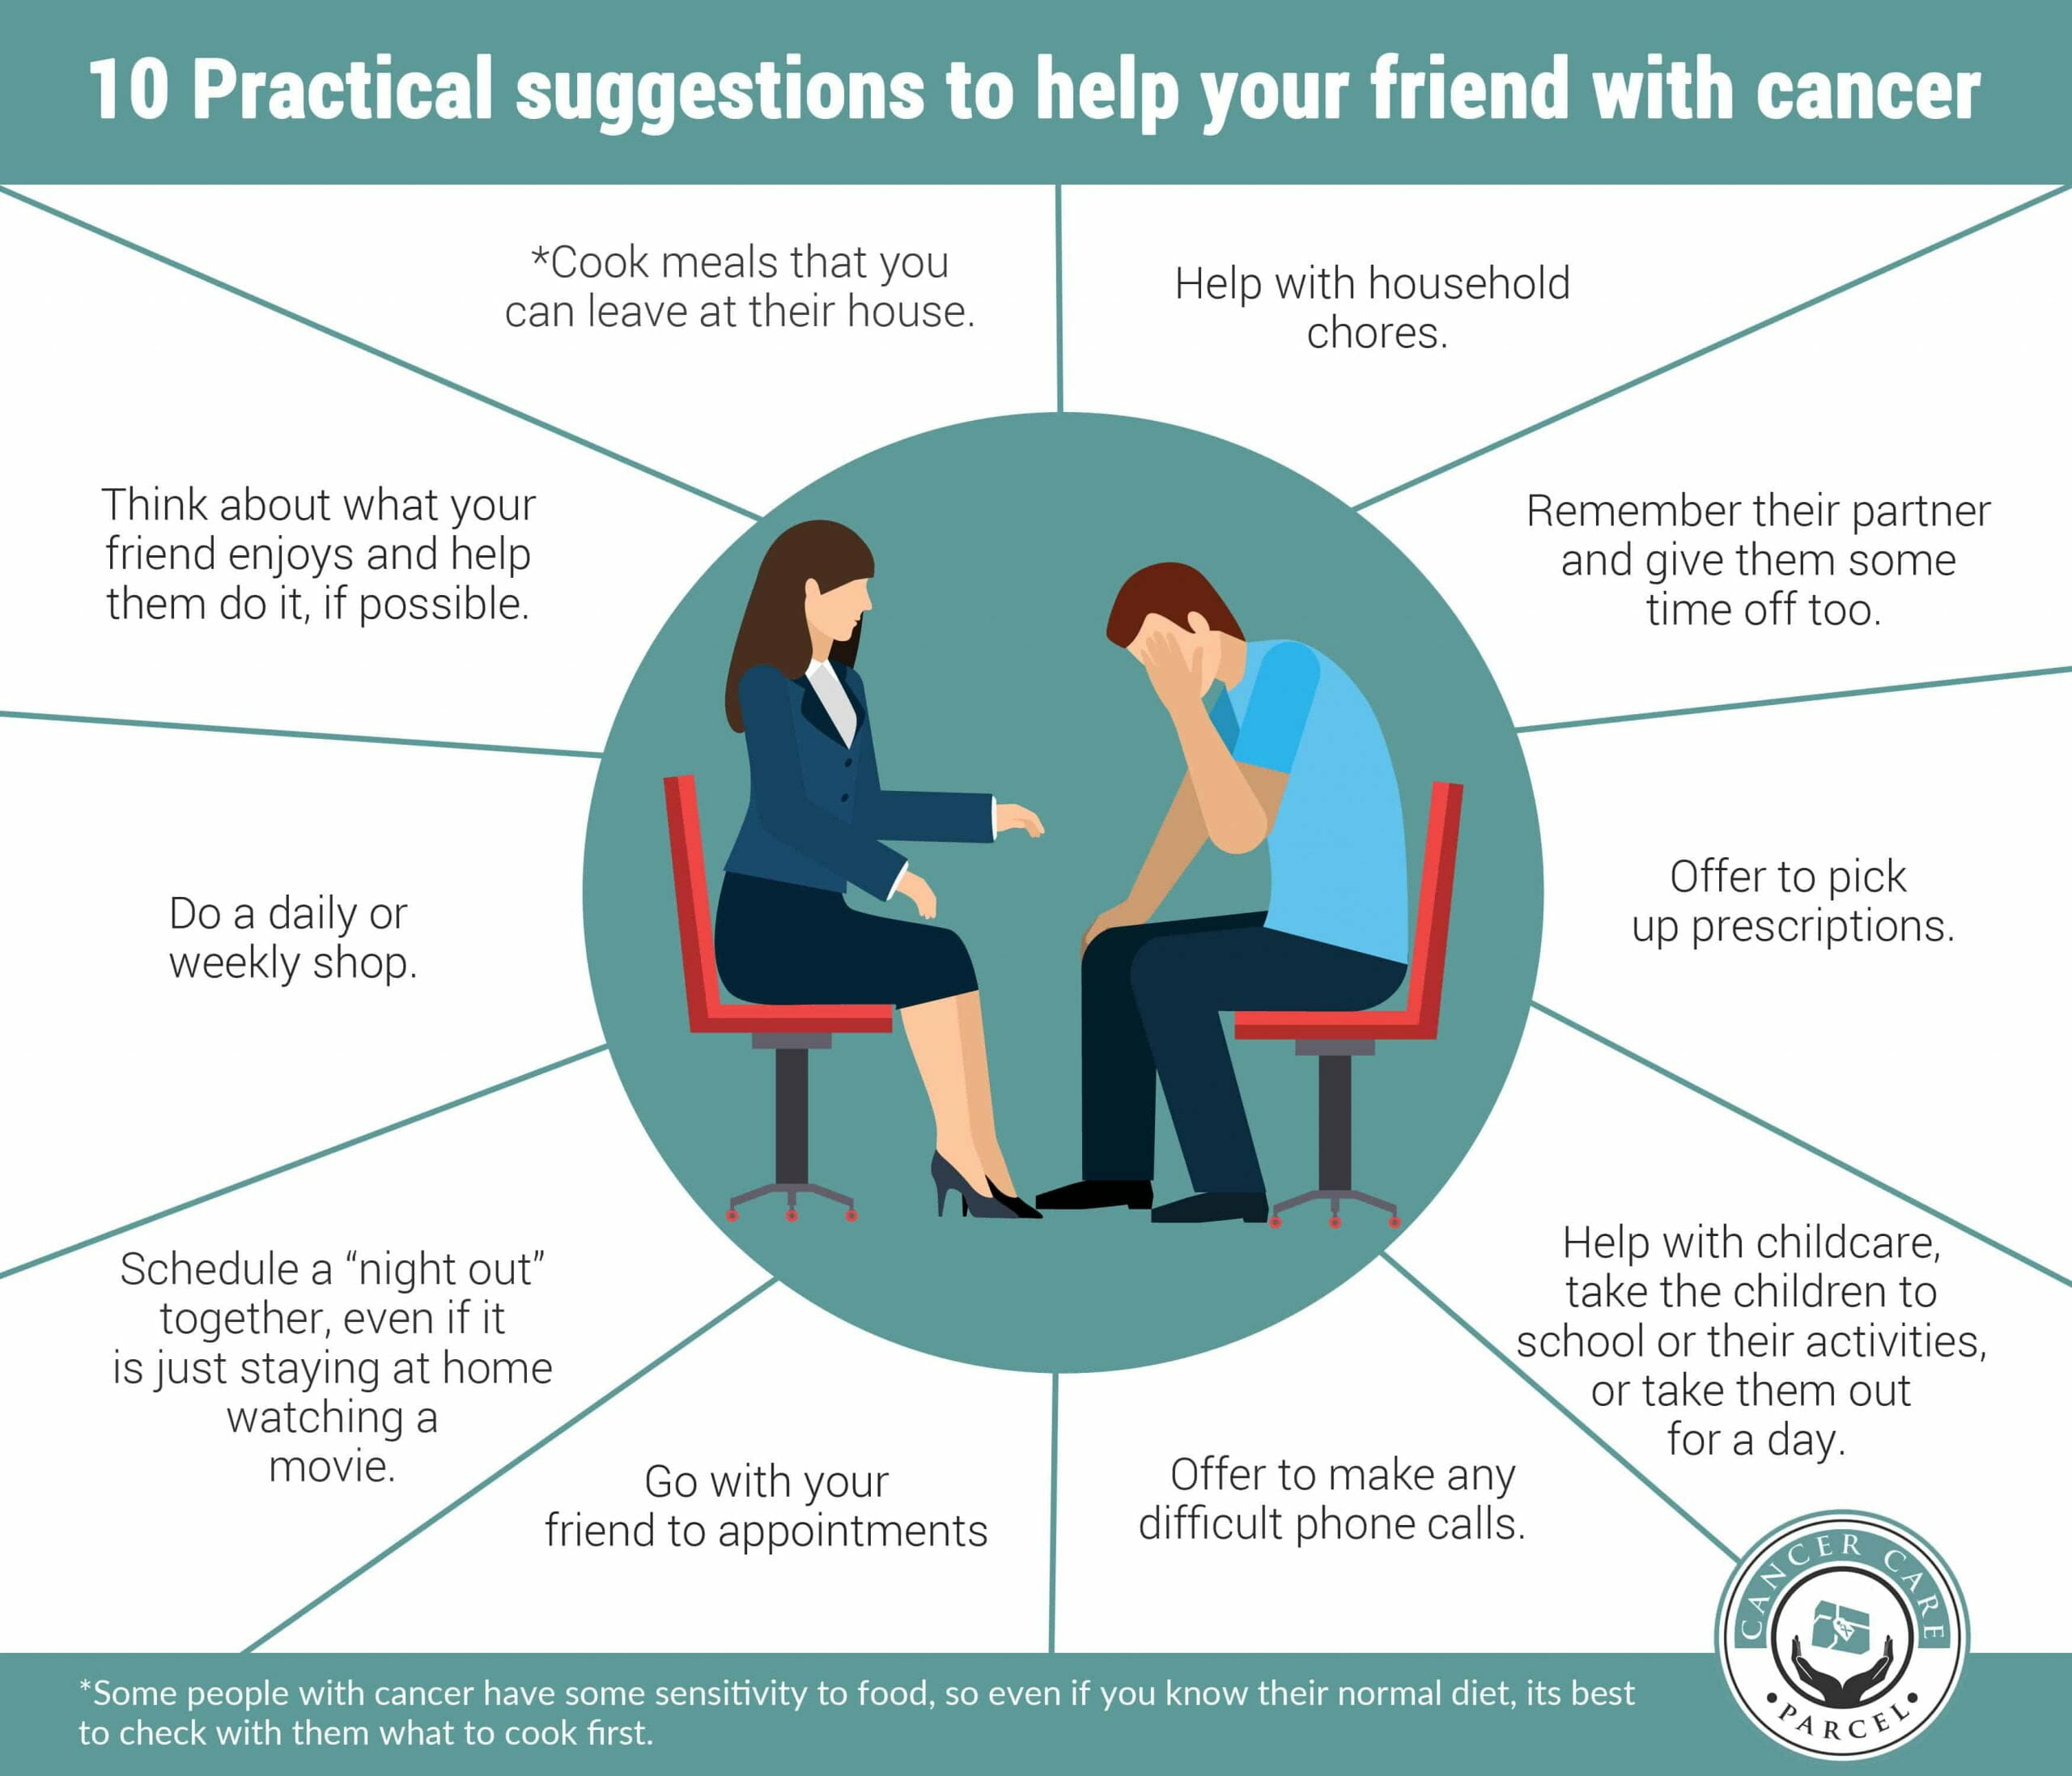 10 Practical suggestions to help someone with cancer